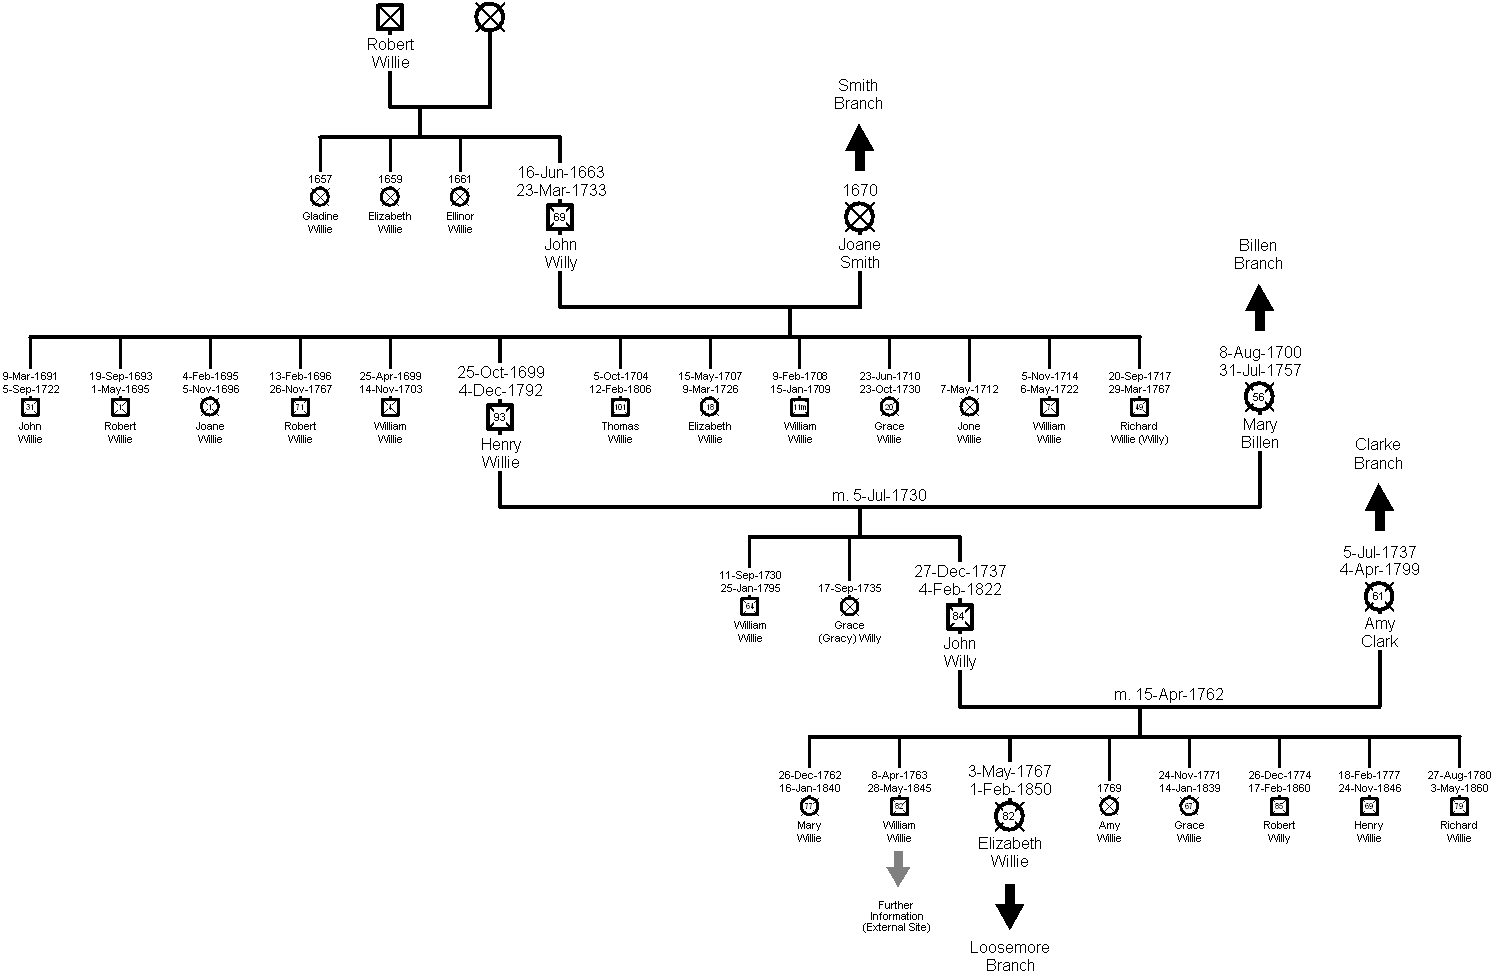 Family Tree - Willie Branch